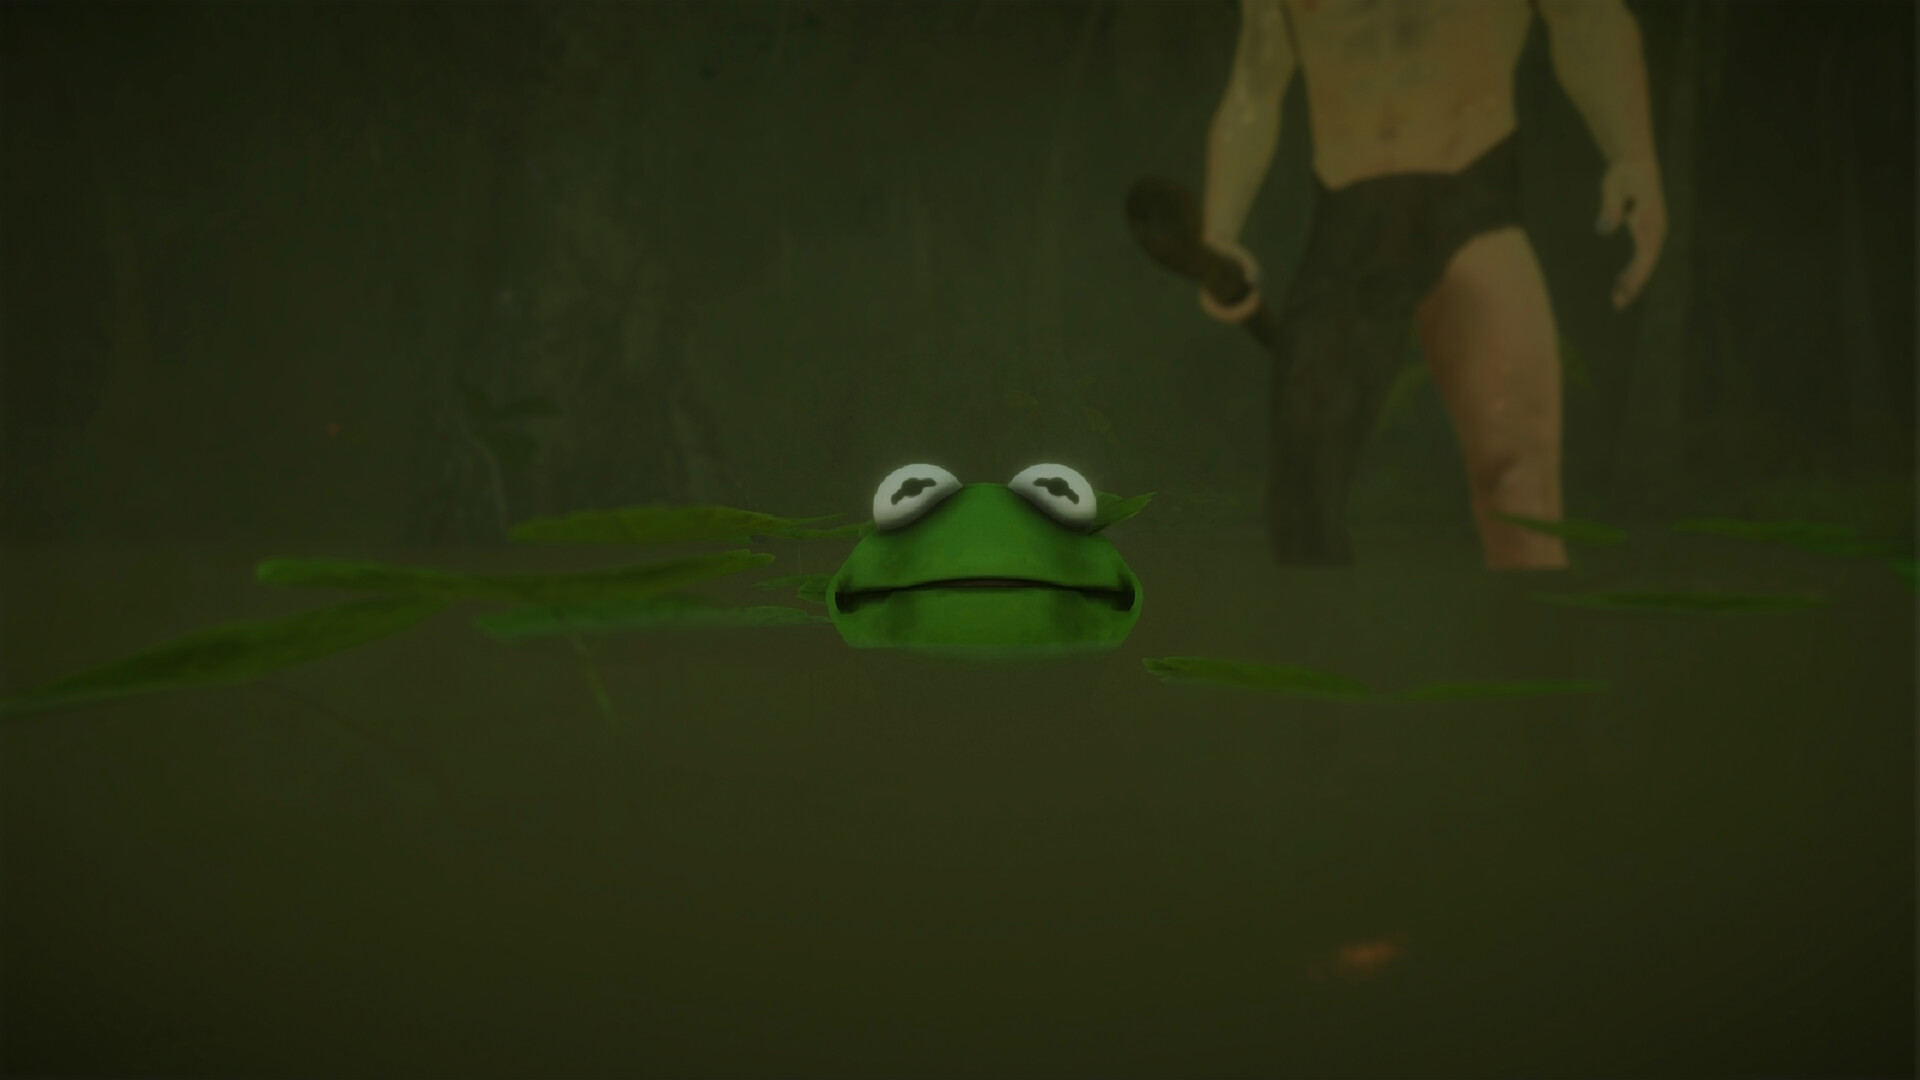 New Steam game with Kermit the Frog possibly a crypto miner